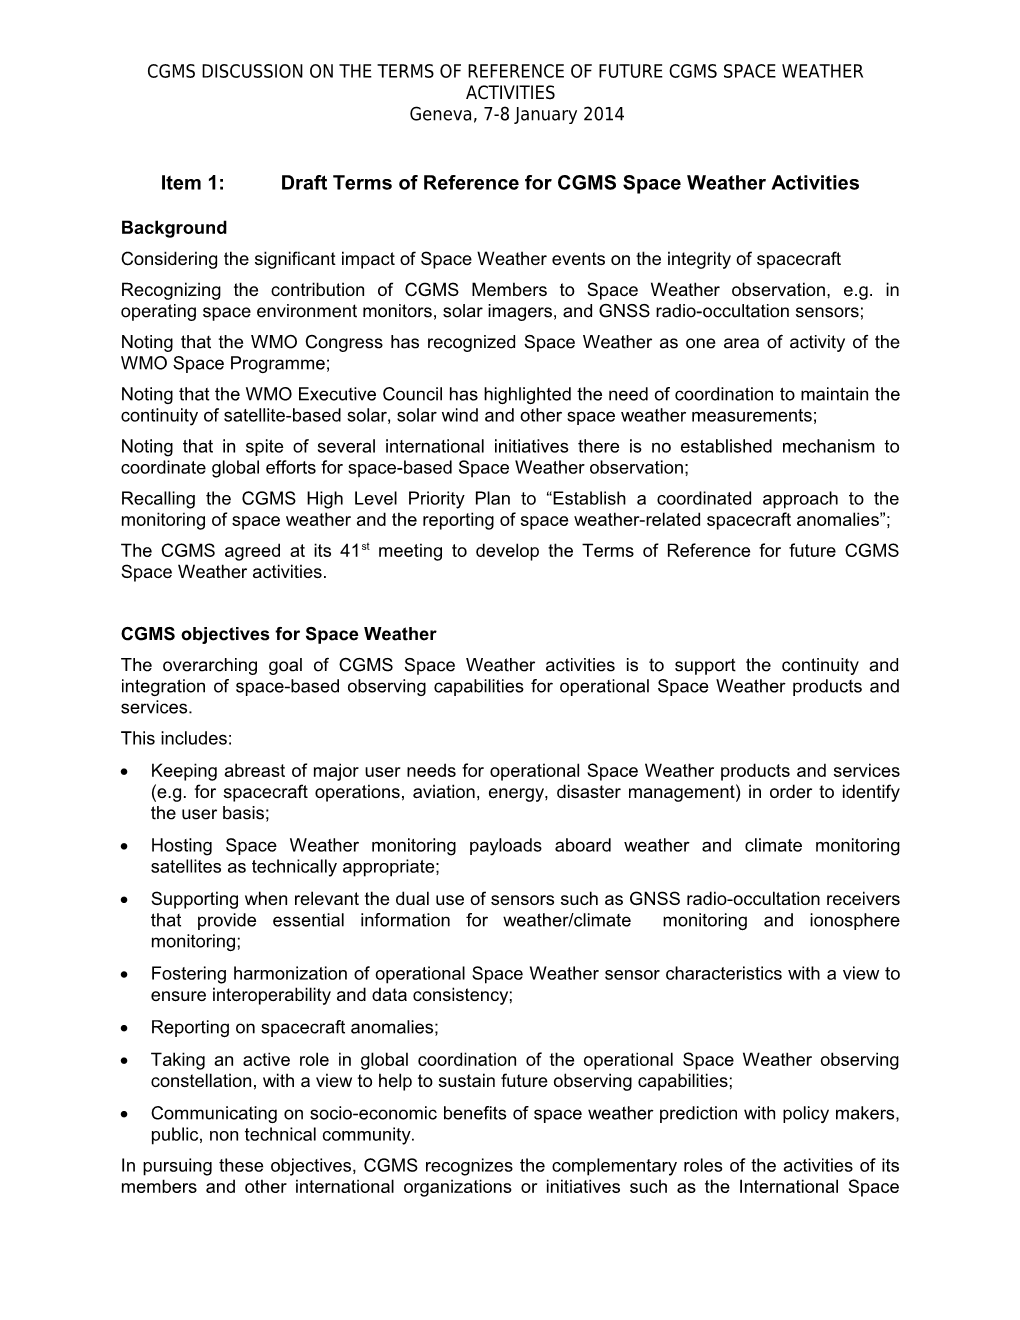 Item 1:Draft Terms of Reference for CGMS Space Weather Activities